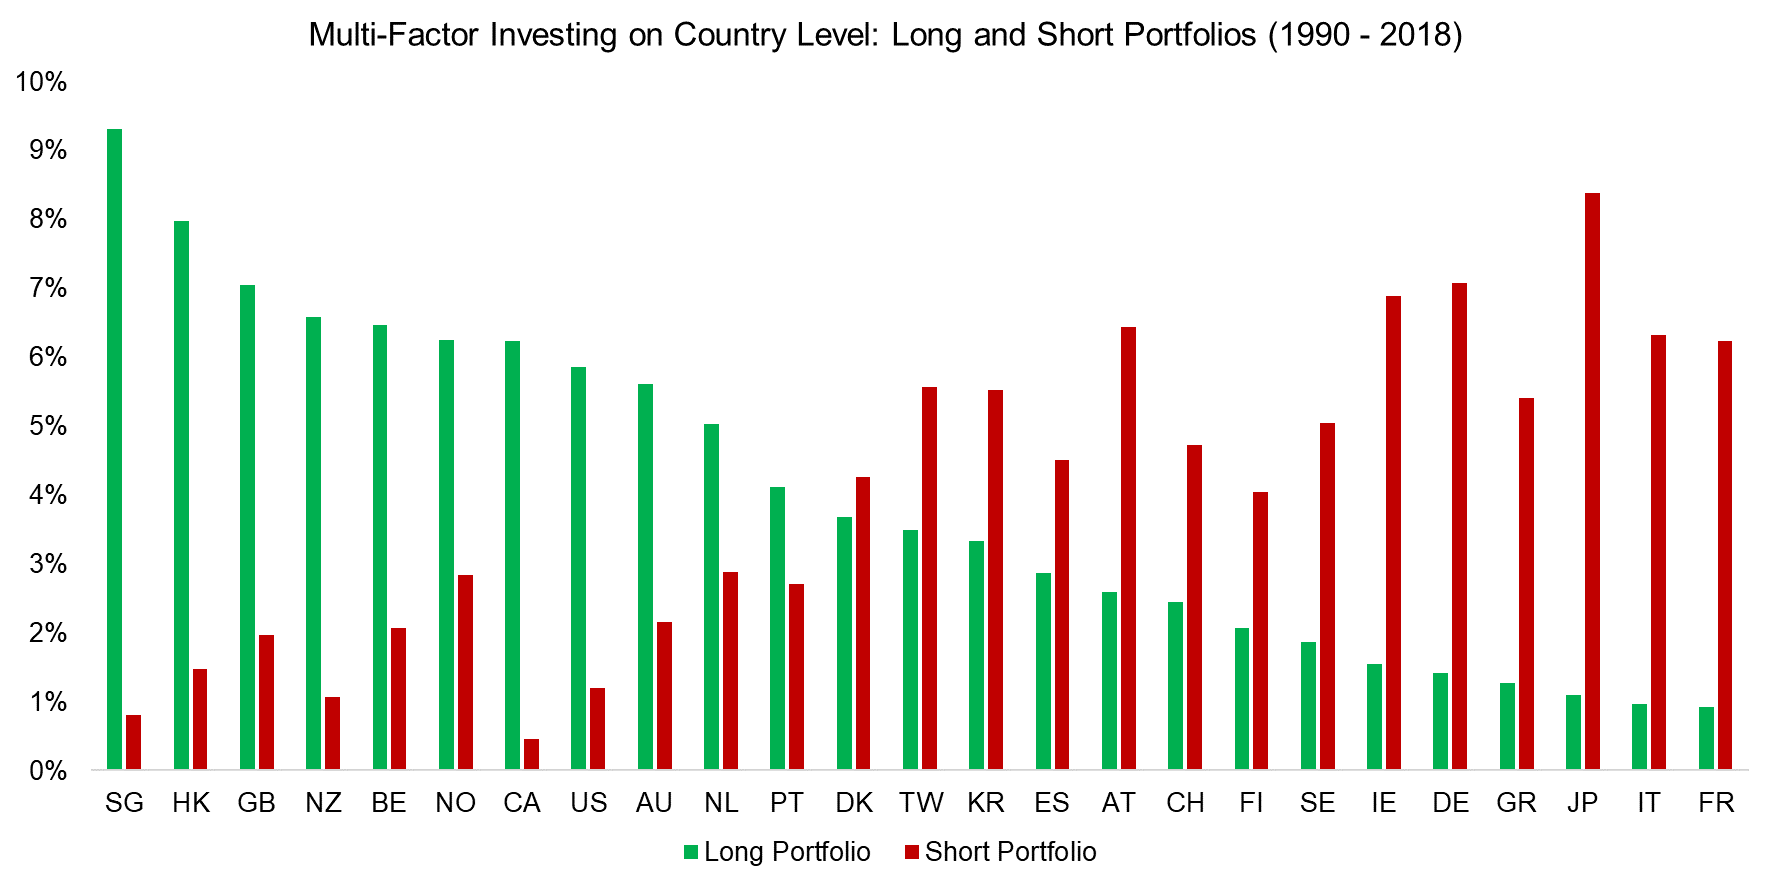 Multi-Factor Investing on Country Level Long and Short Portfolios (1990